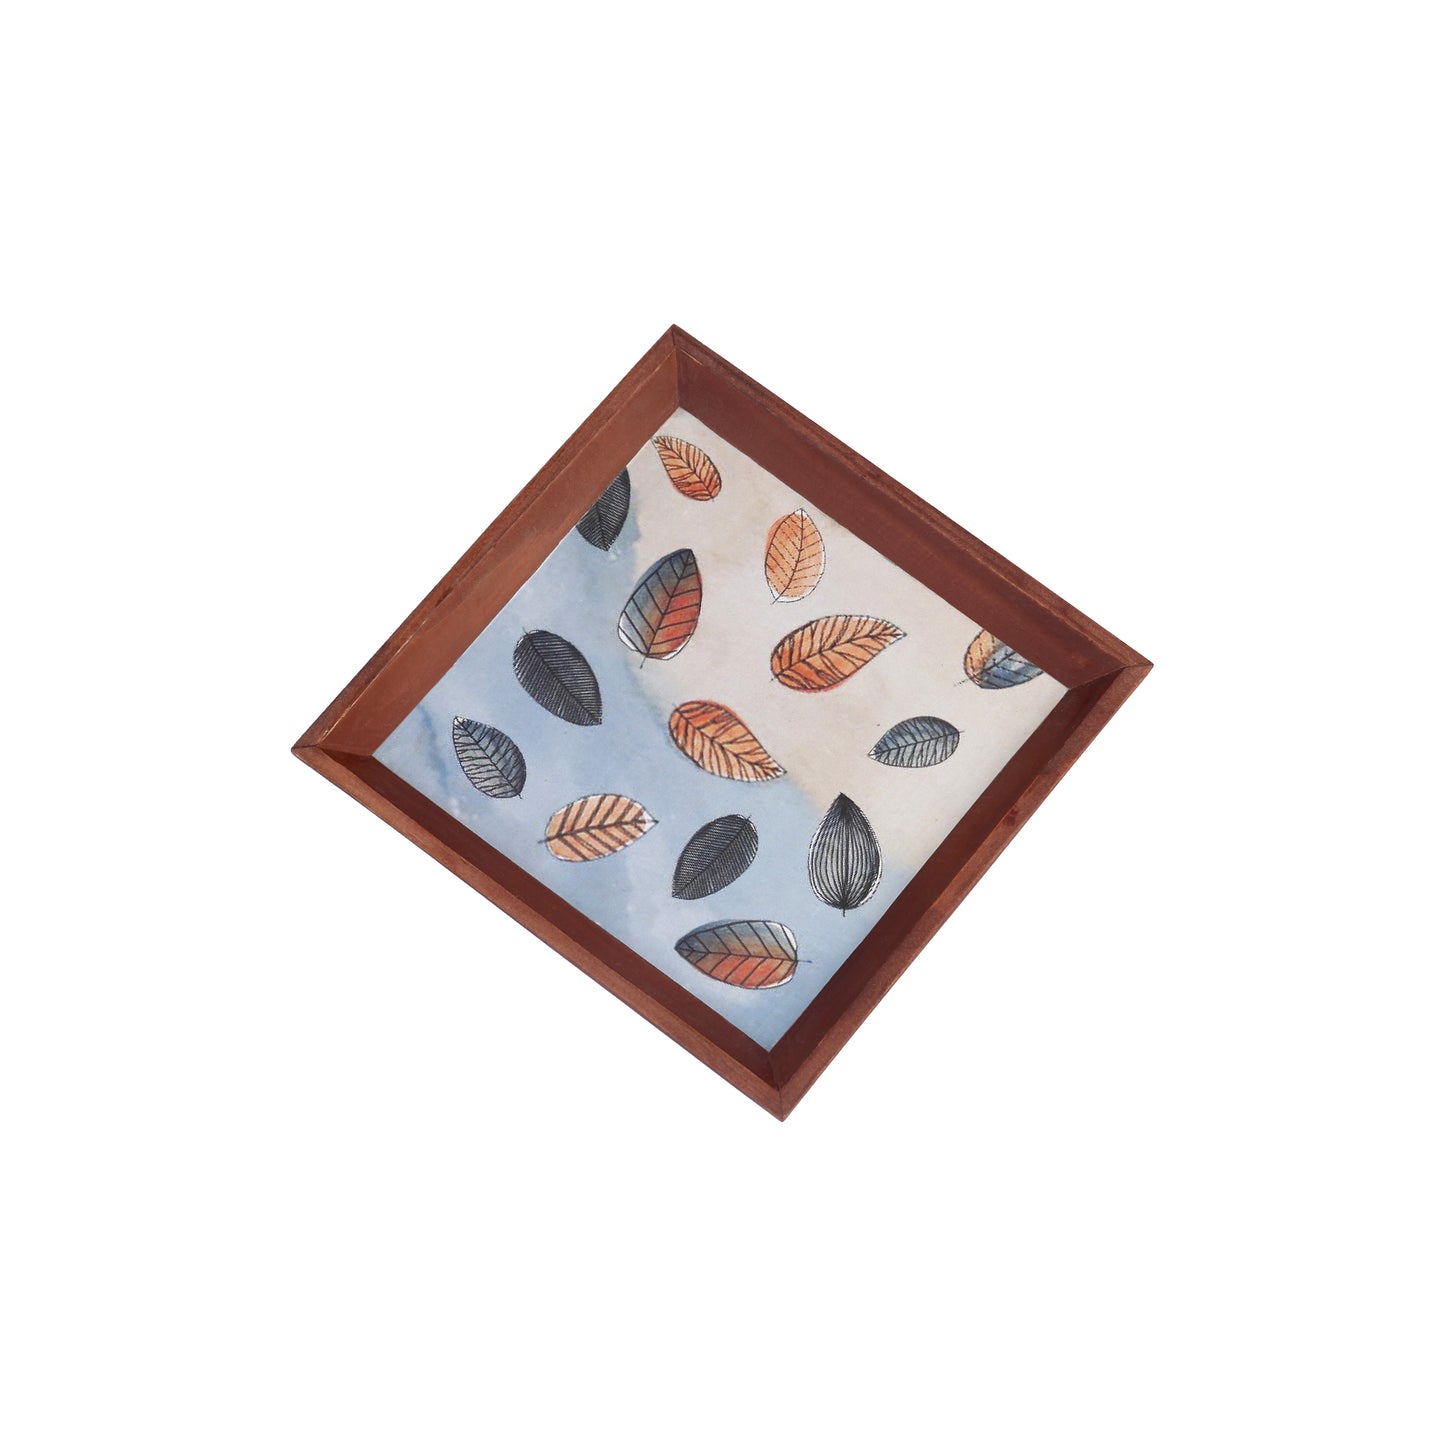 A Tiny Mistake Fall Leaves Small Square Wooden Serving Tray, 18 x 18 x 2 cm